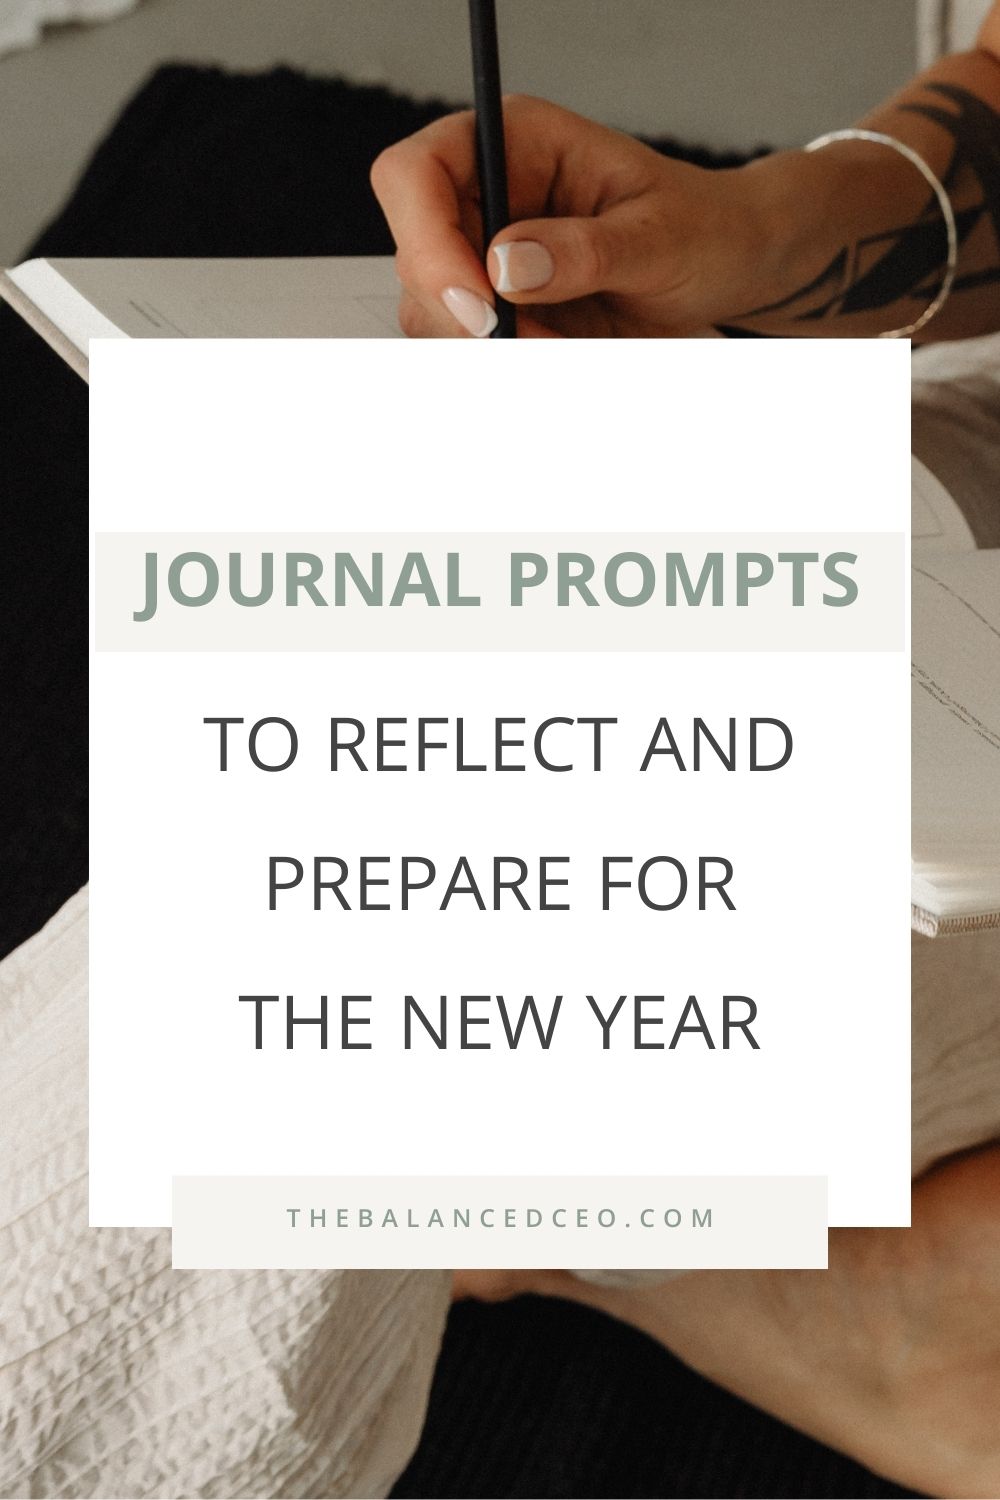 Journal Prompts to Reflect and Prepare for the New Year